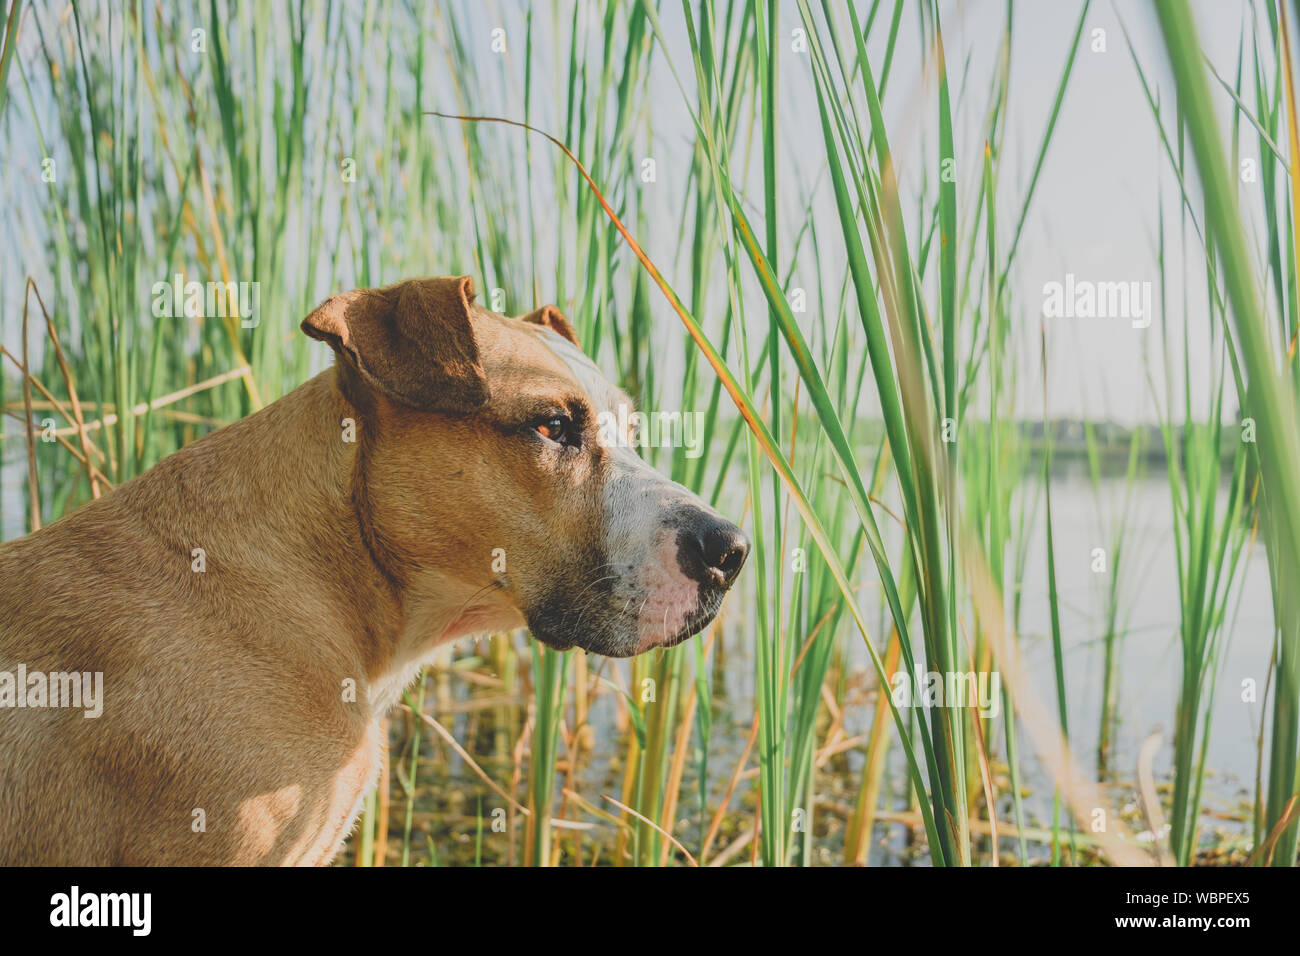 Portrait of a dog near a lake in green grasses. Staffordshire terrier having enjoyable free time in beautiful nature by the river Stock Photo